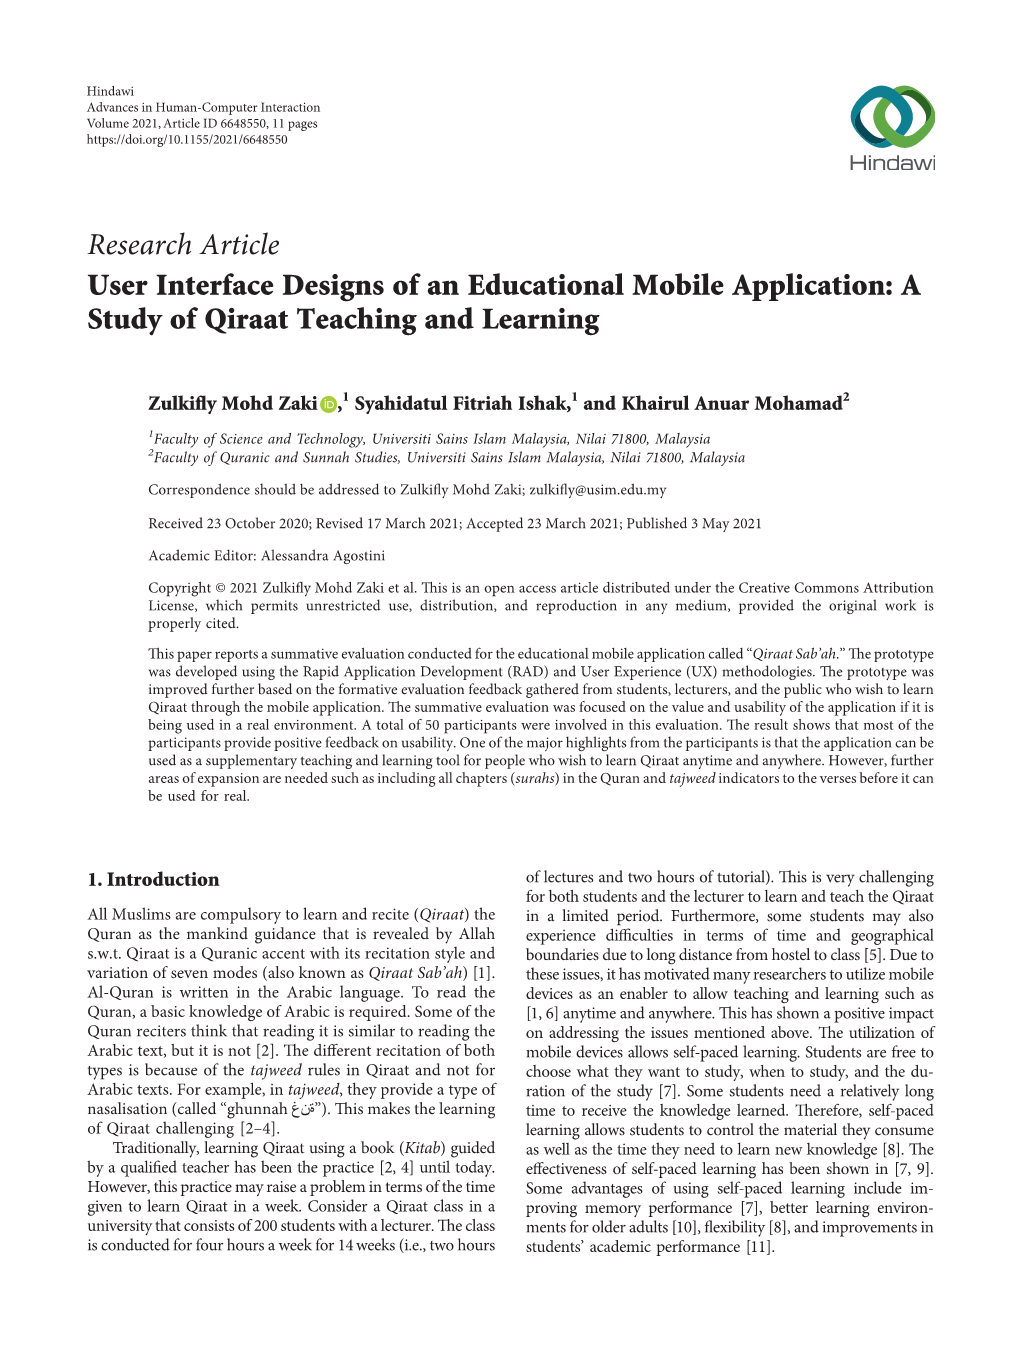 User Interface Designs of an Educational Mobile Application: a Study of Qiraat Teaching and Learning